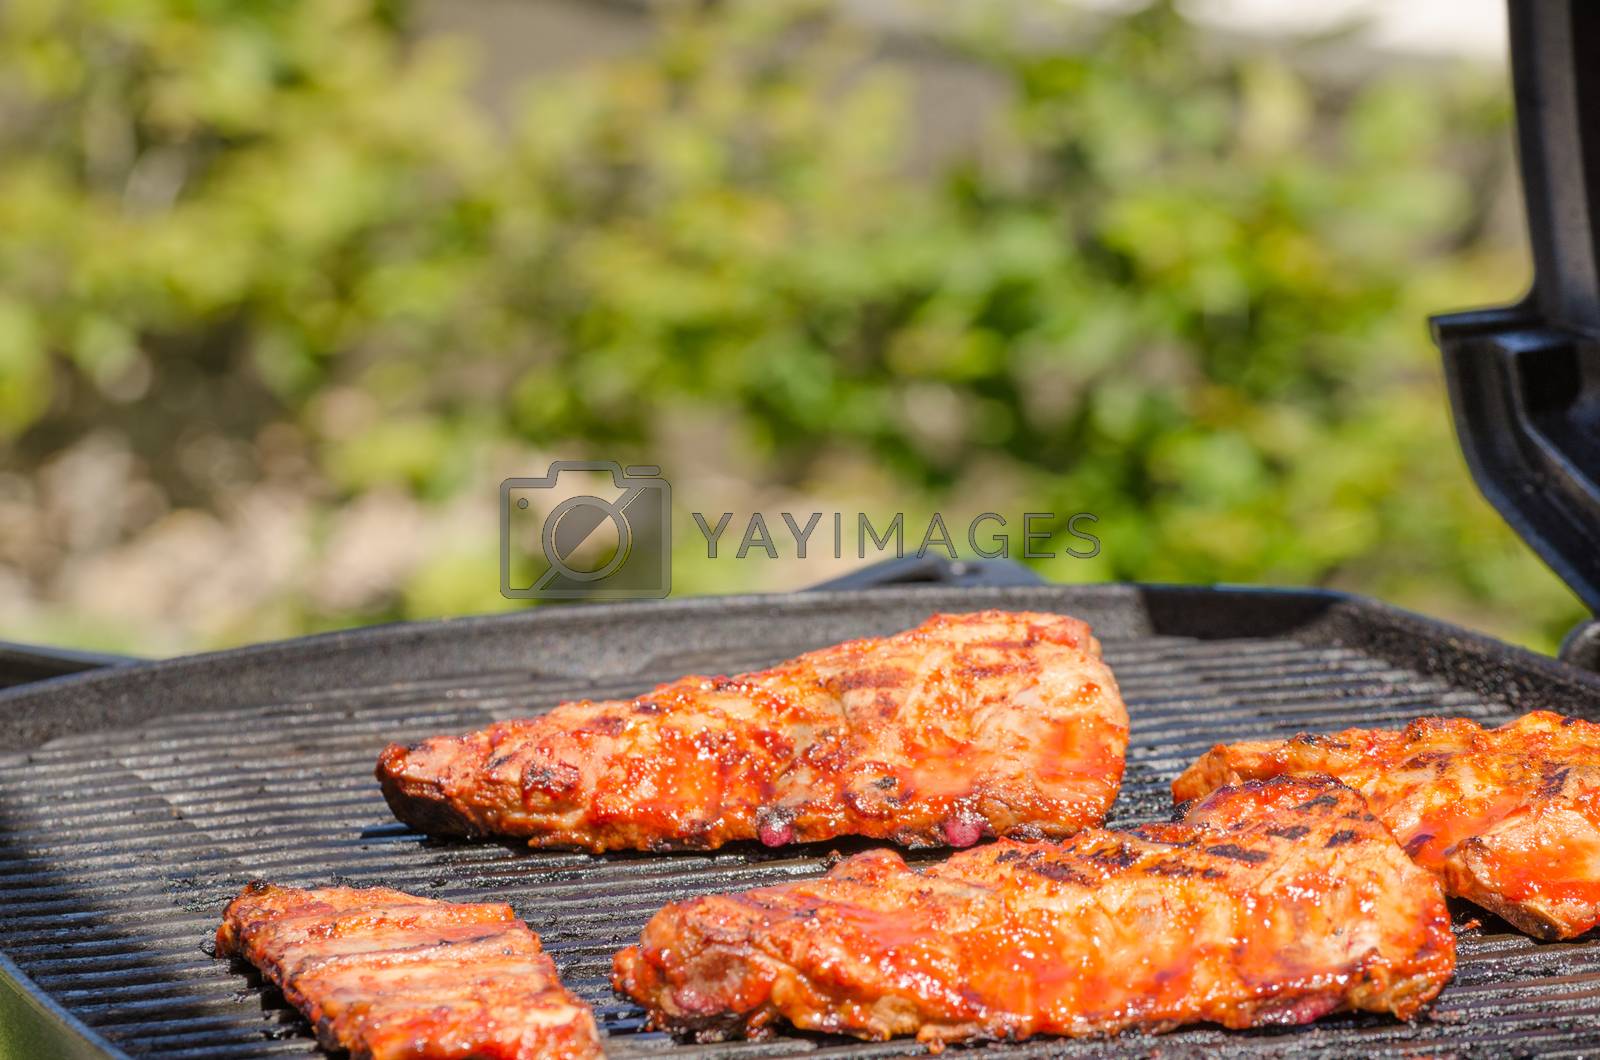 Royalty free image of Spareribs on grill with hot marinade by Peteer